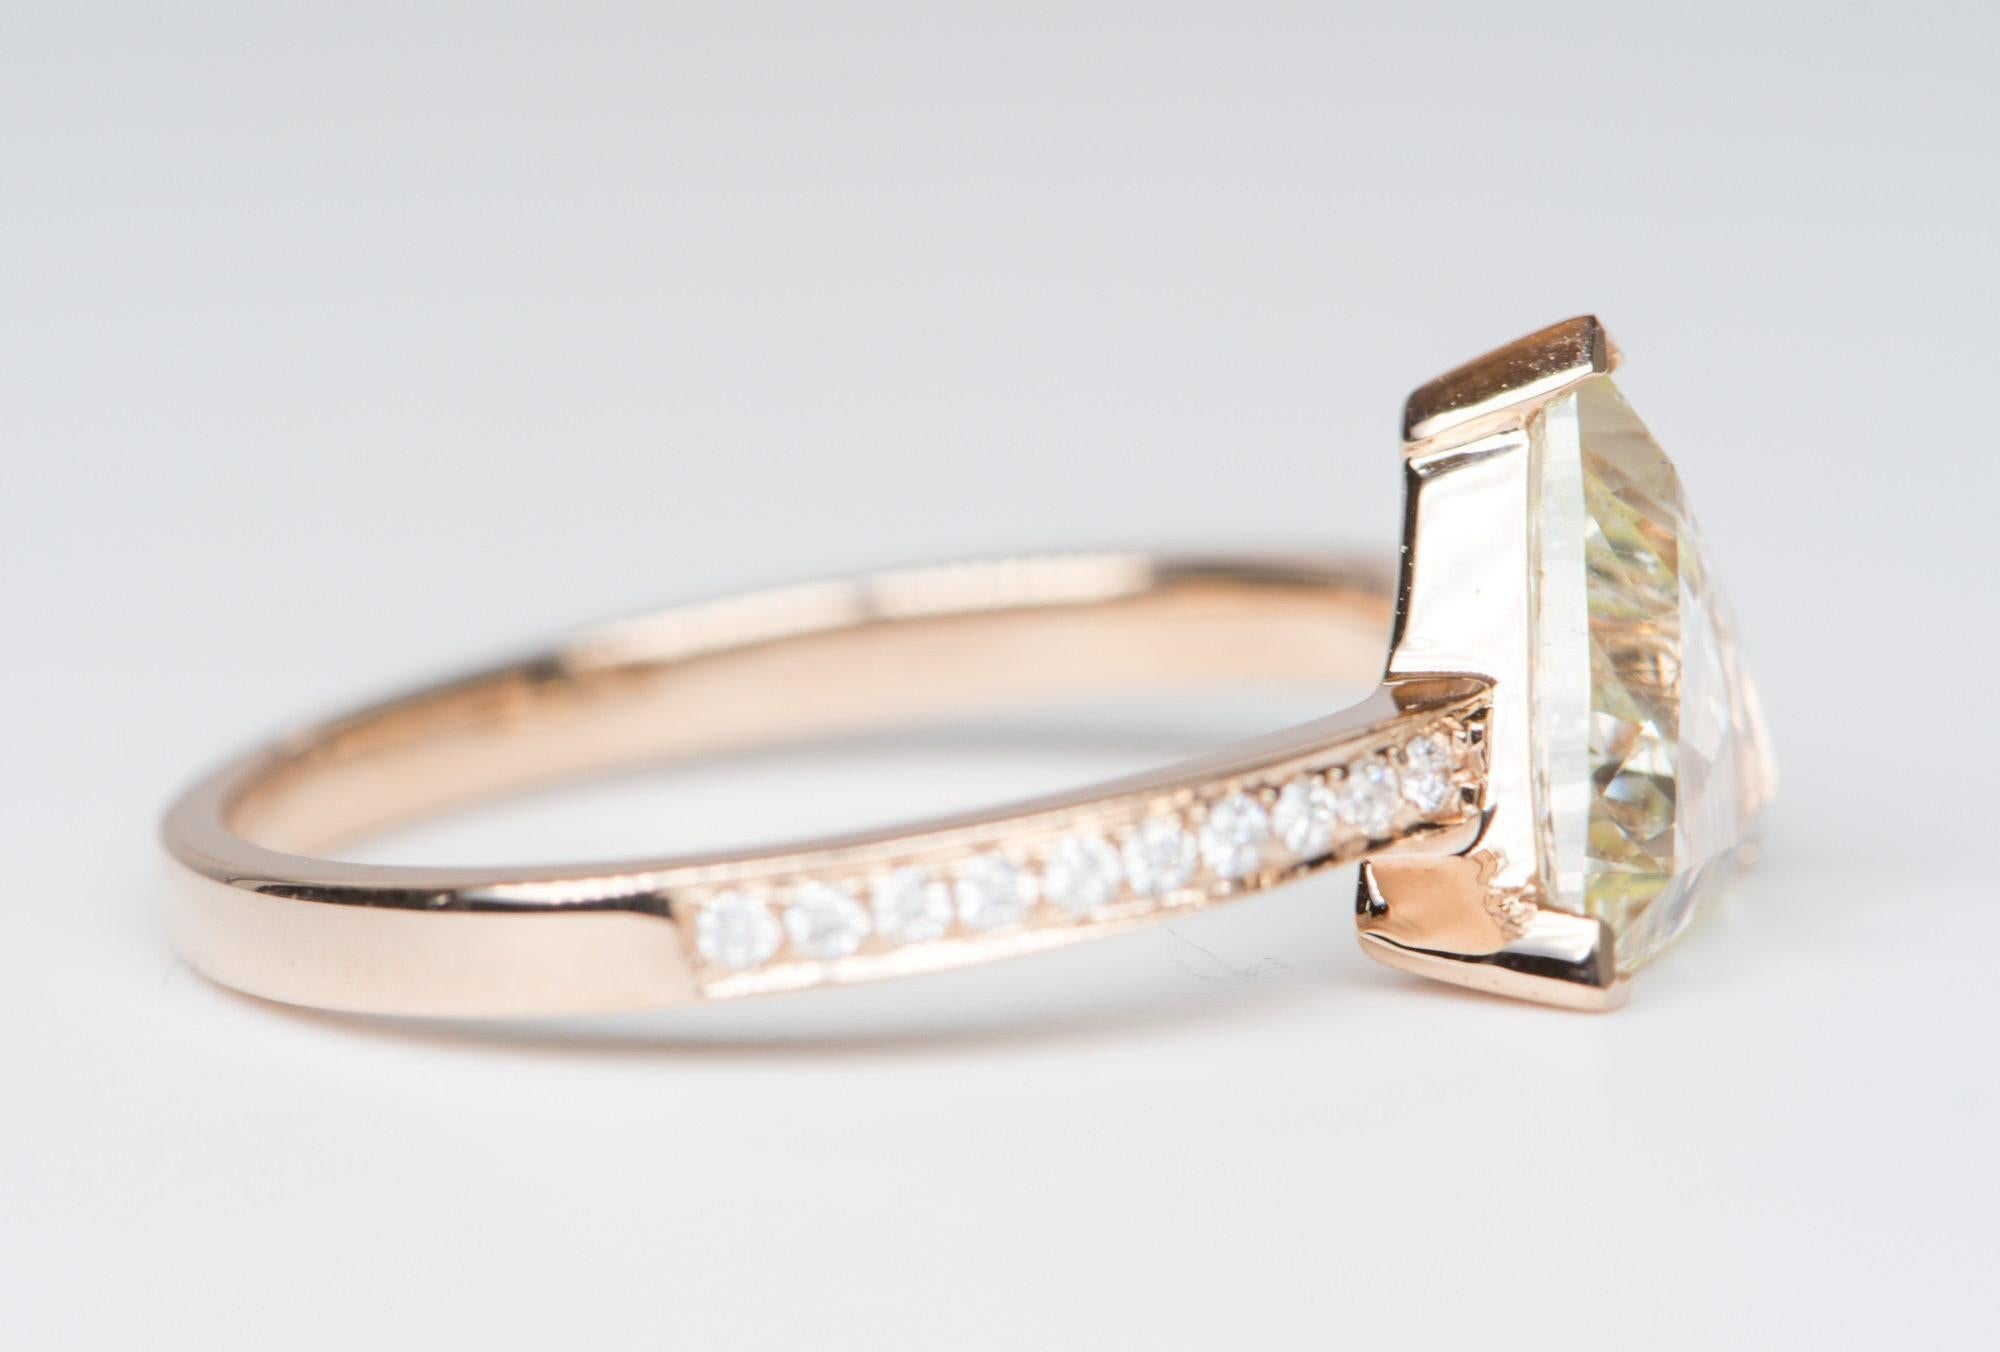 â™¥ Solid 14K rose gold engagement ring set with a trillion rose cute clear diamond on a diamond half eternity pave band
â™¥ This stunning clear colorless diamond has excellent transparency 
â™¥ The overall setting measures 10.1mm in width, 8.8mm in